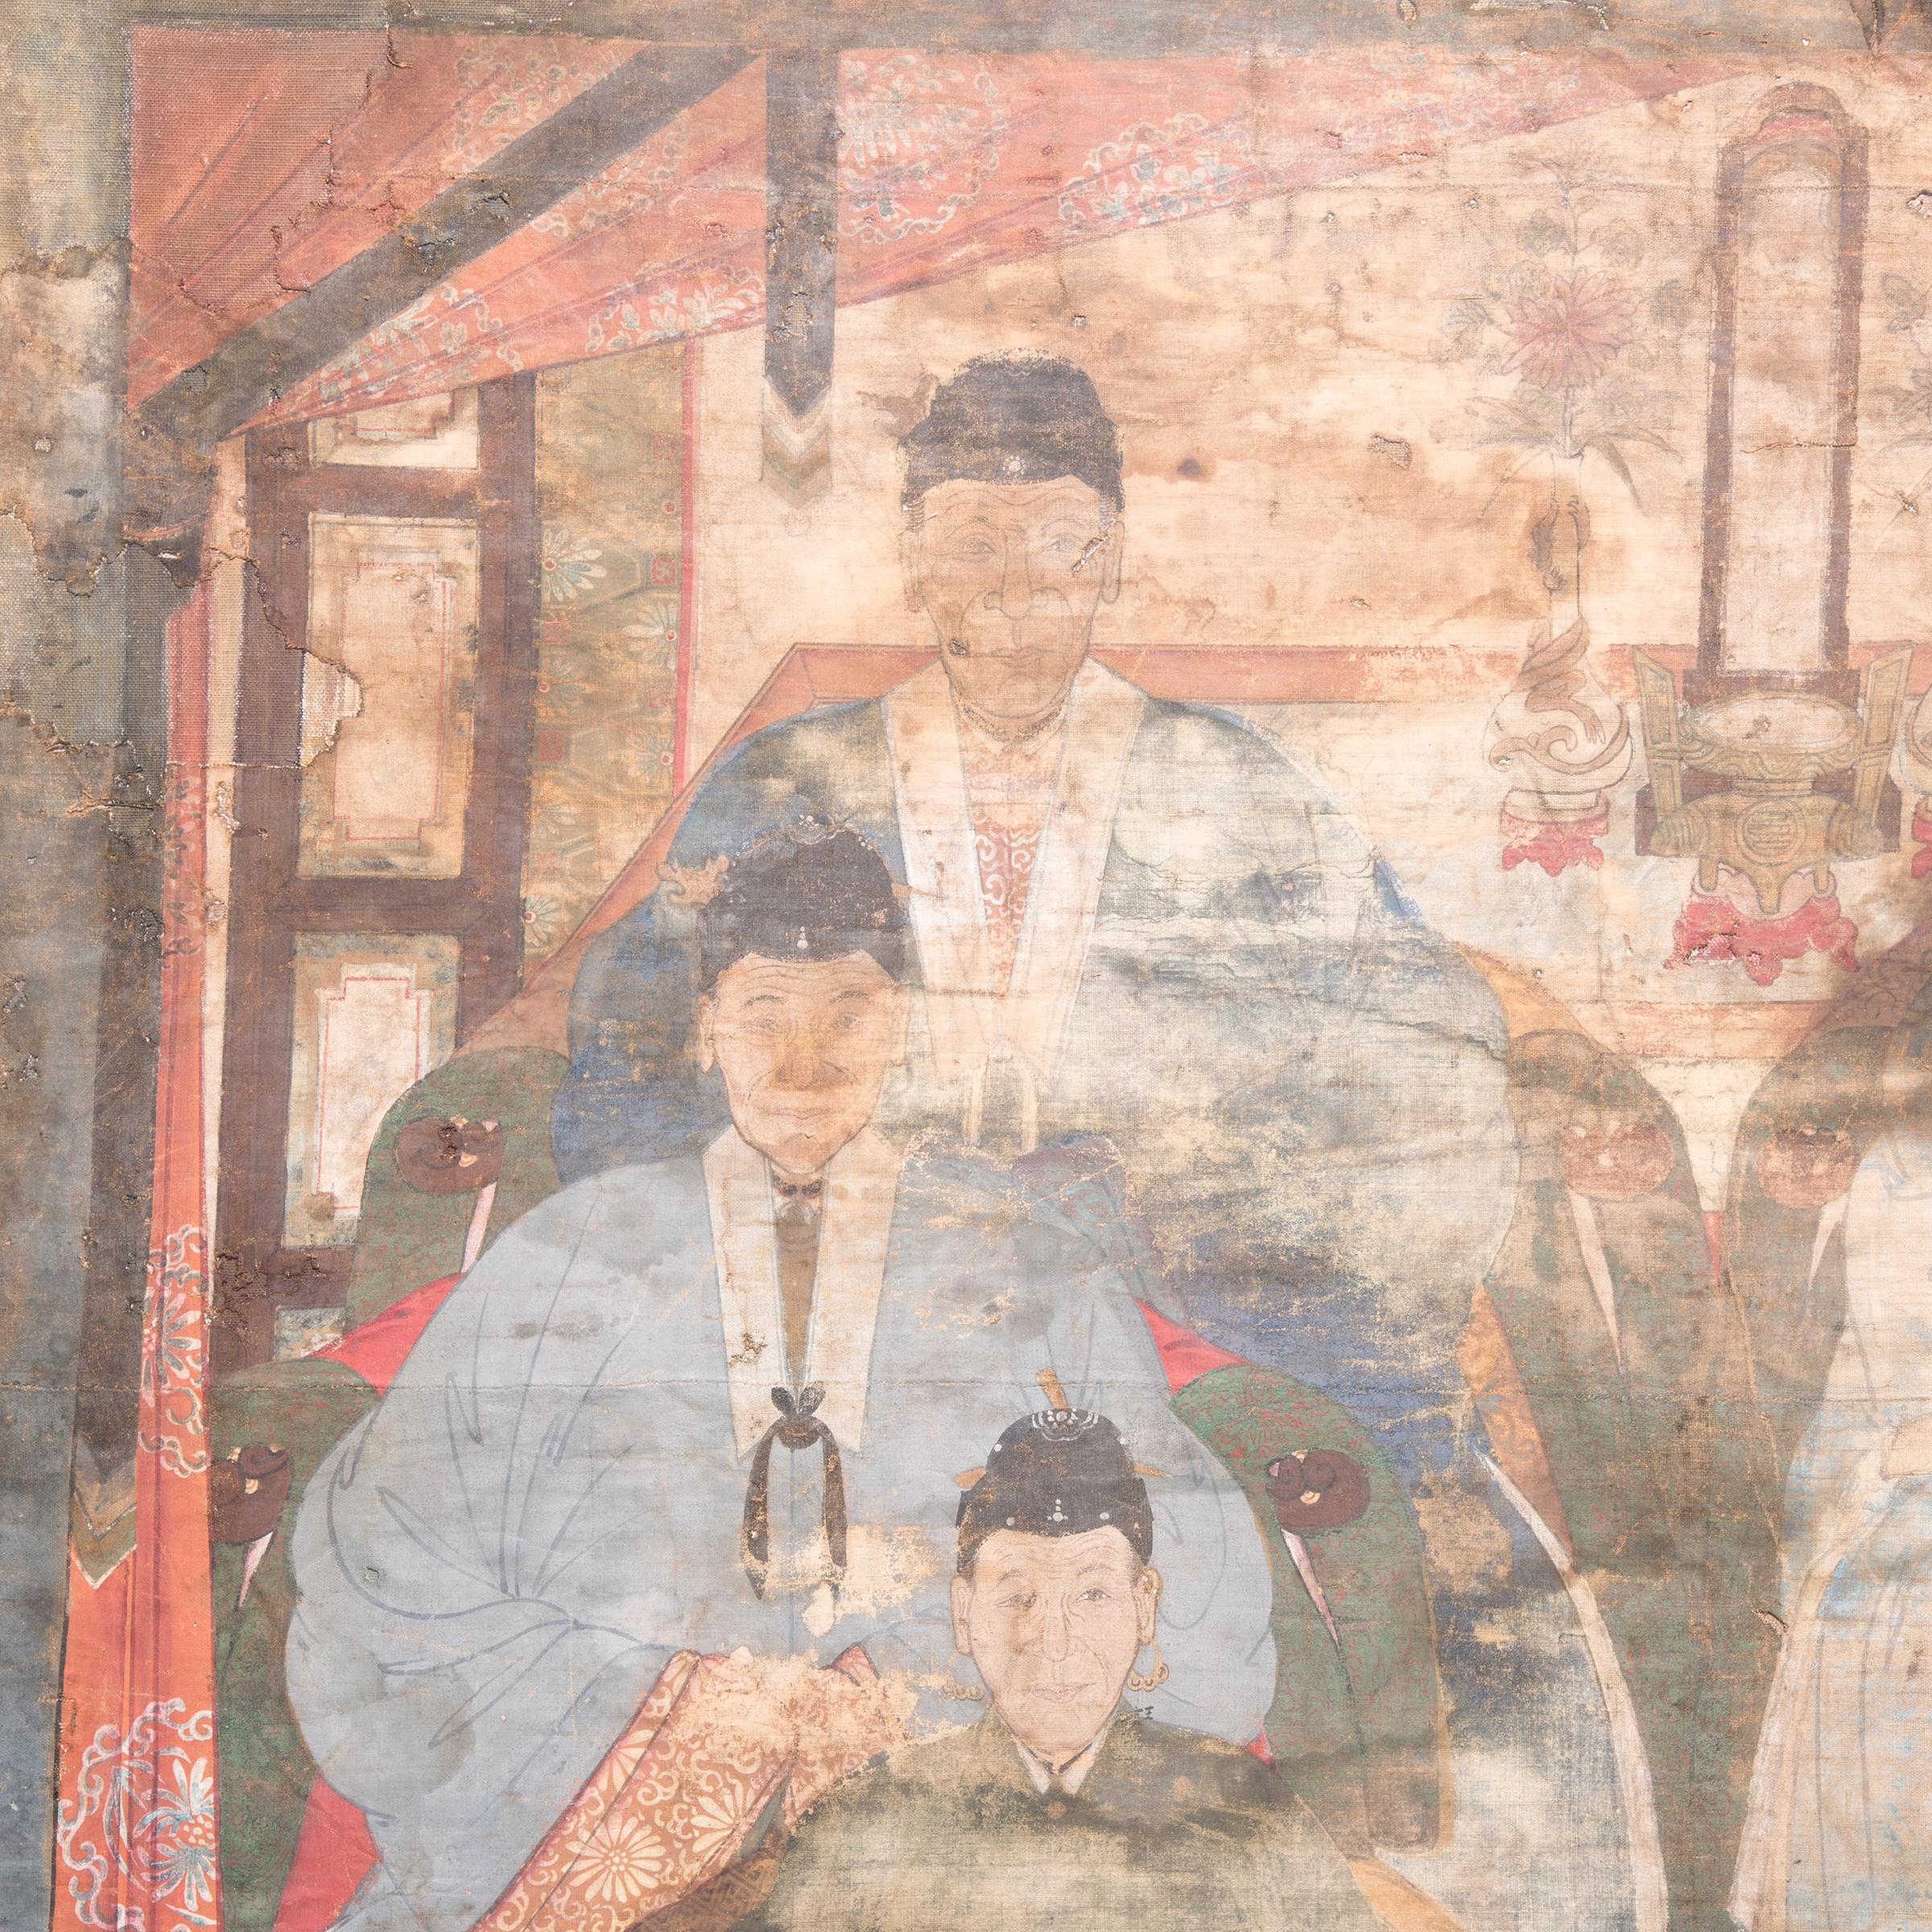 Monumental Chinese Ancestor Portrait, c. 1900 - Qing Painting by Unknown